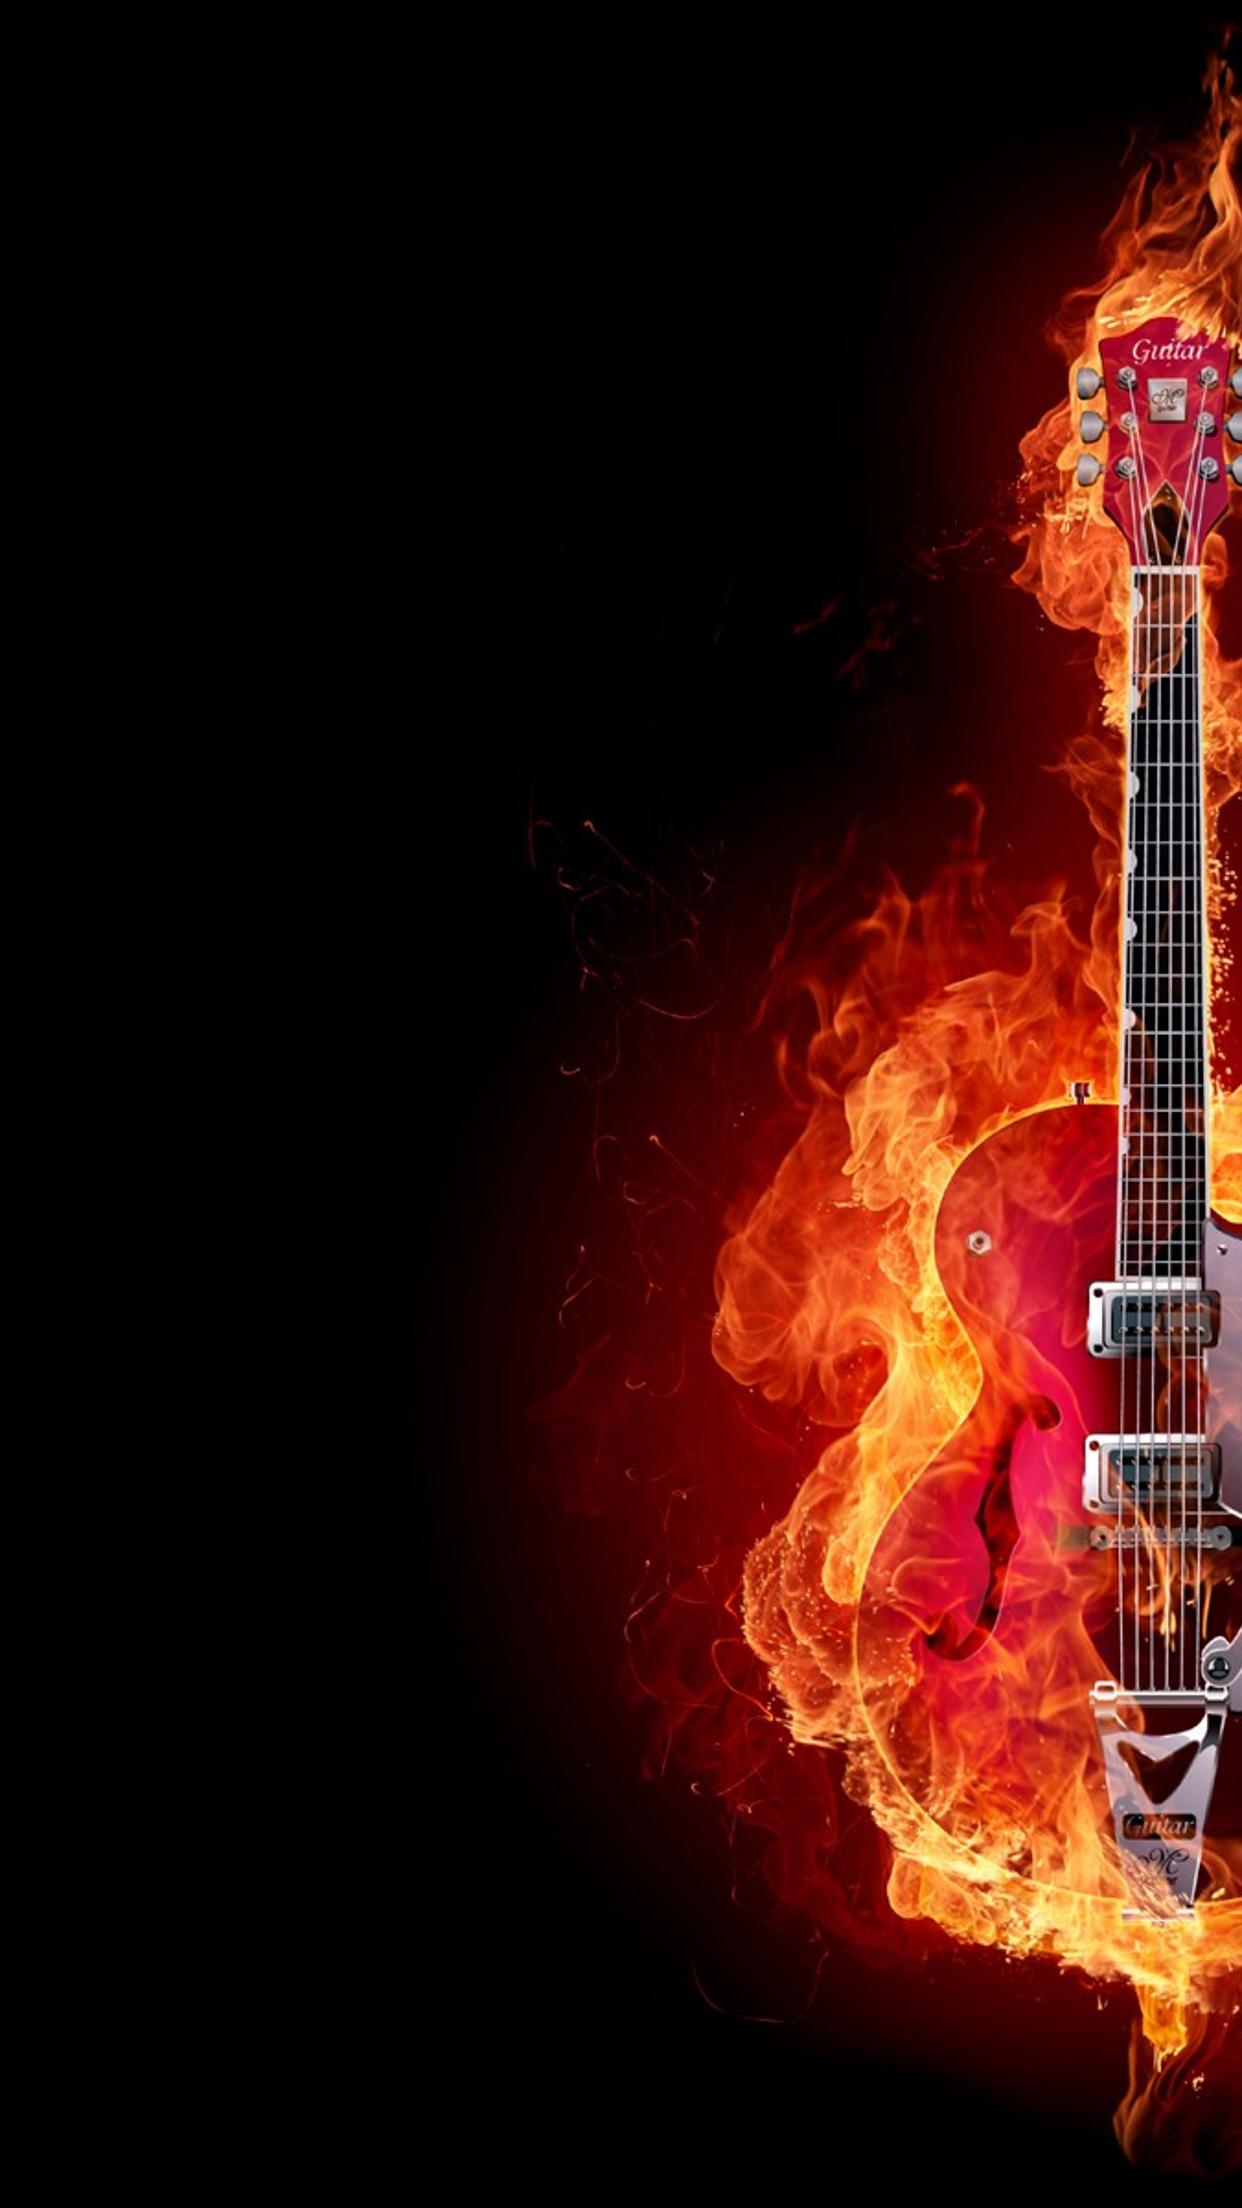 Electric guitar on fire - wonderful music